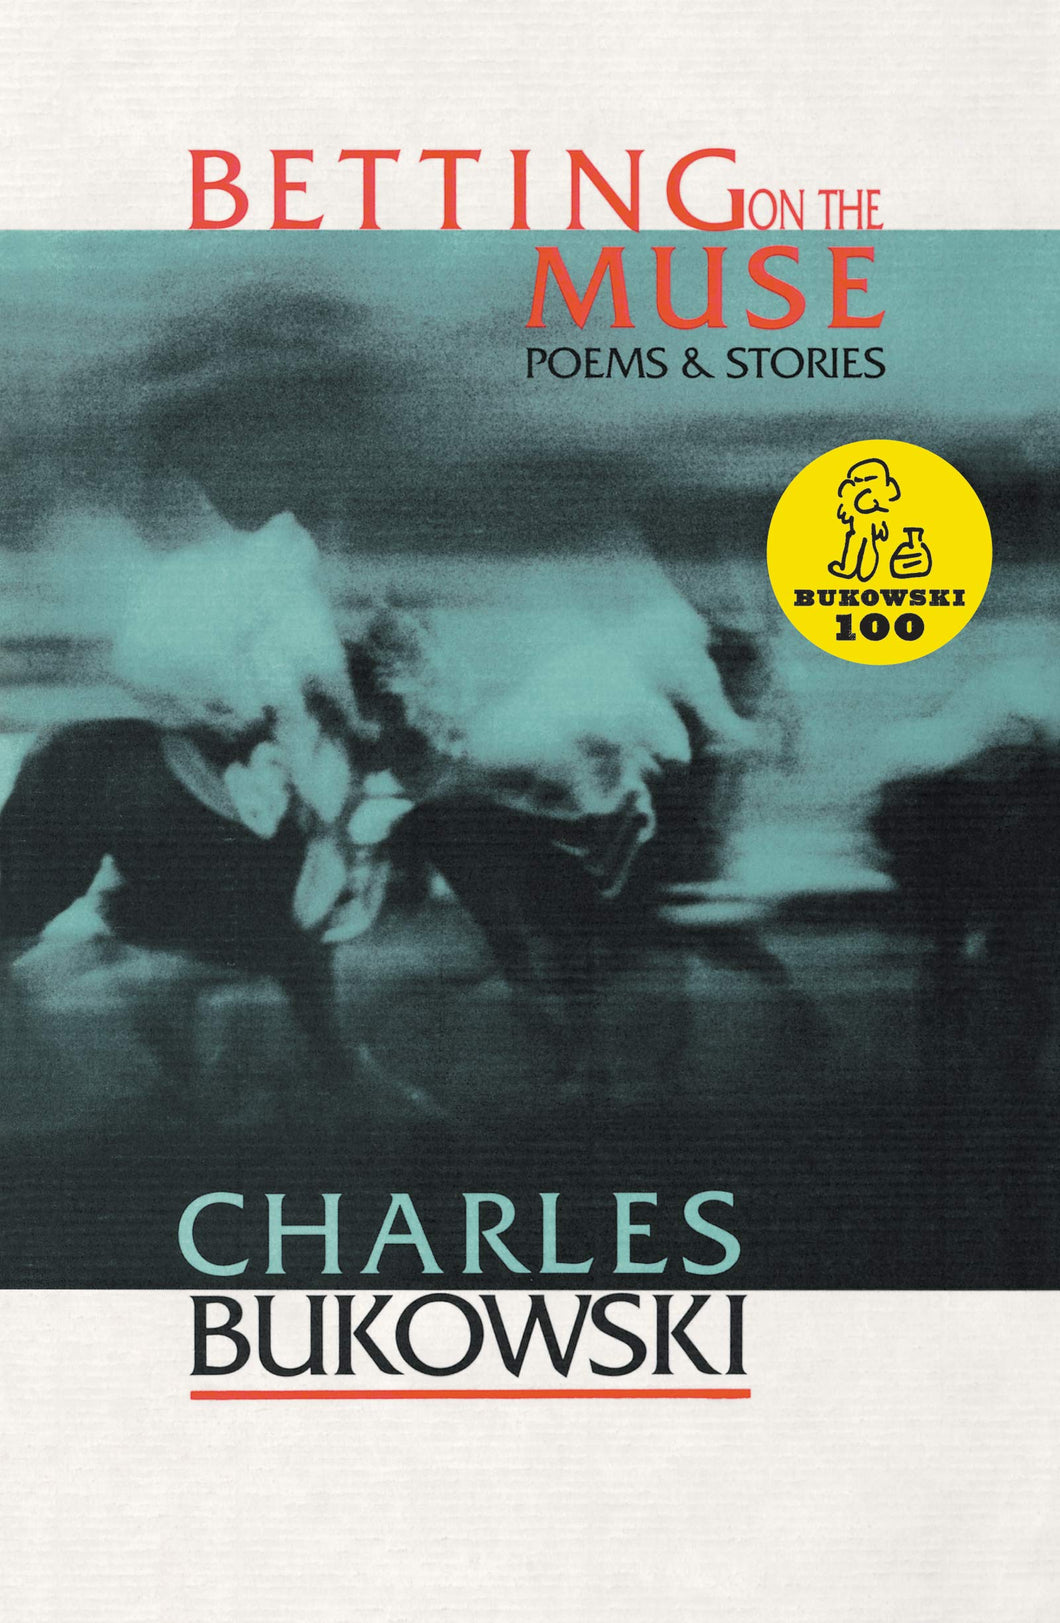 Betting on the Muse by Charles Bukowski